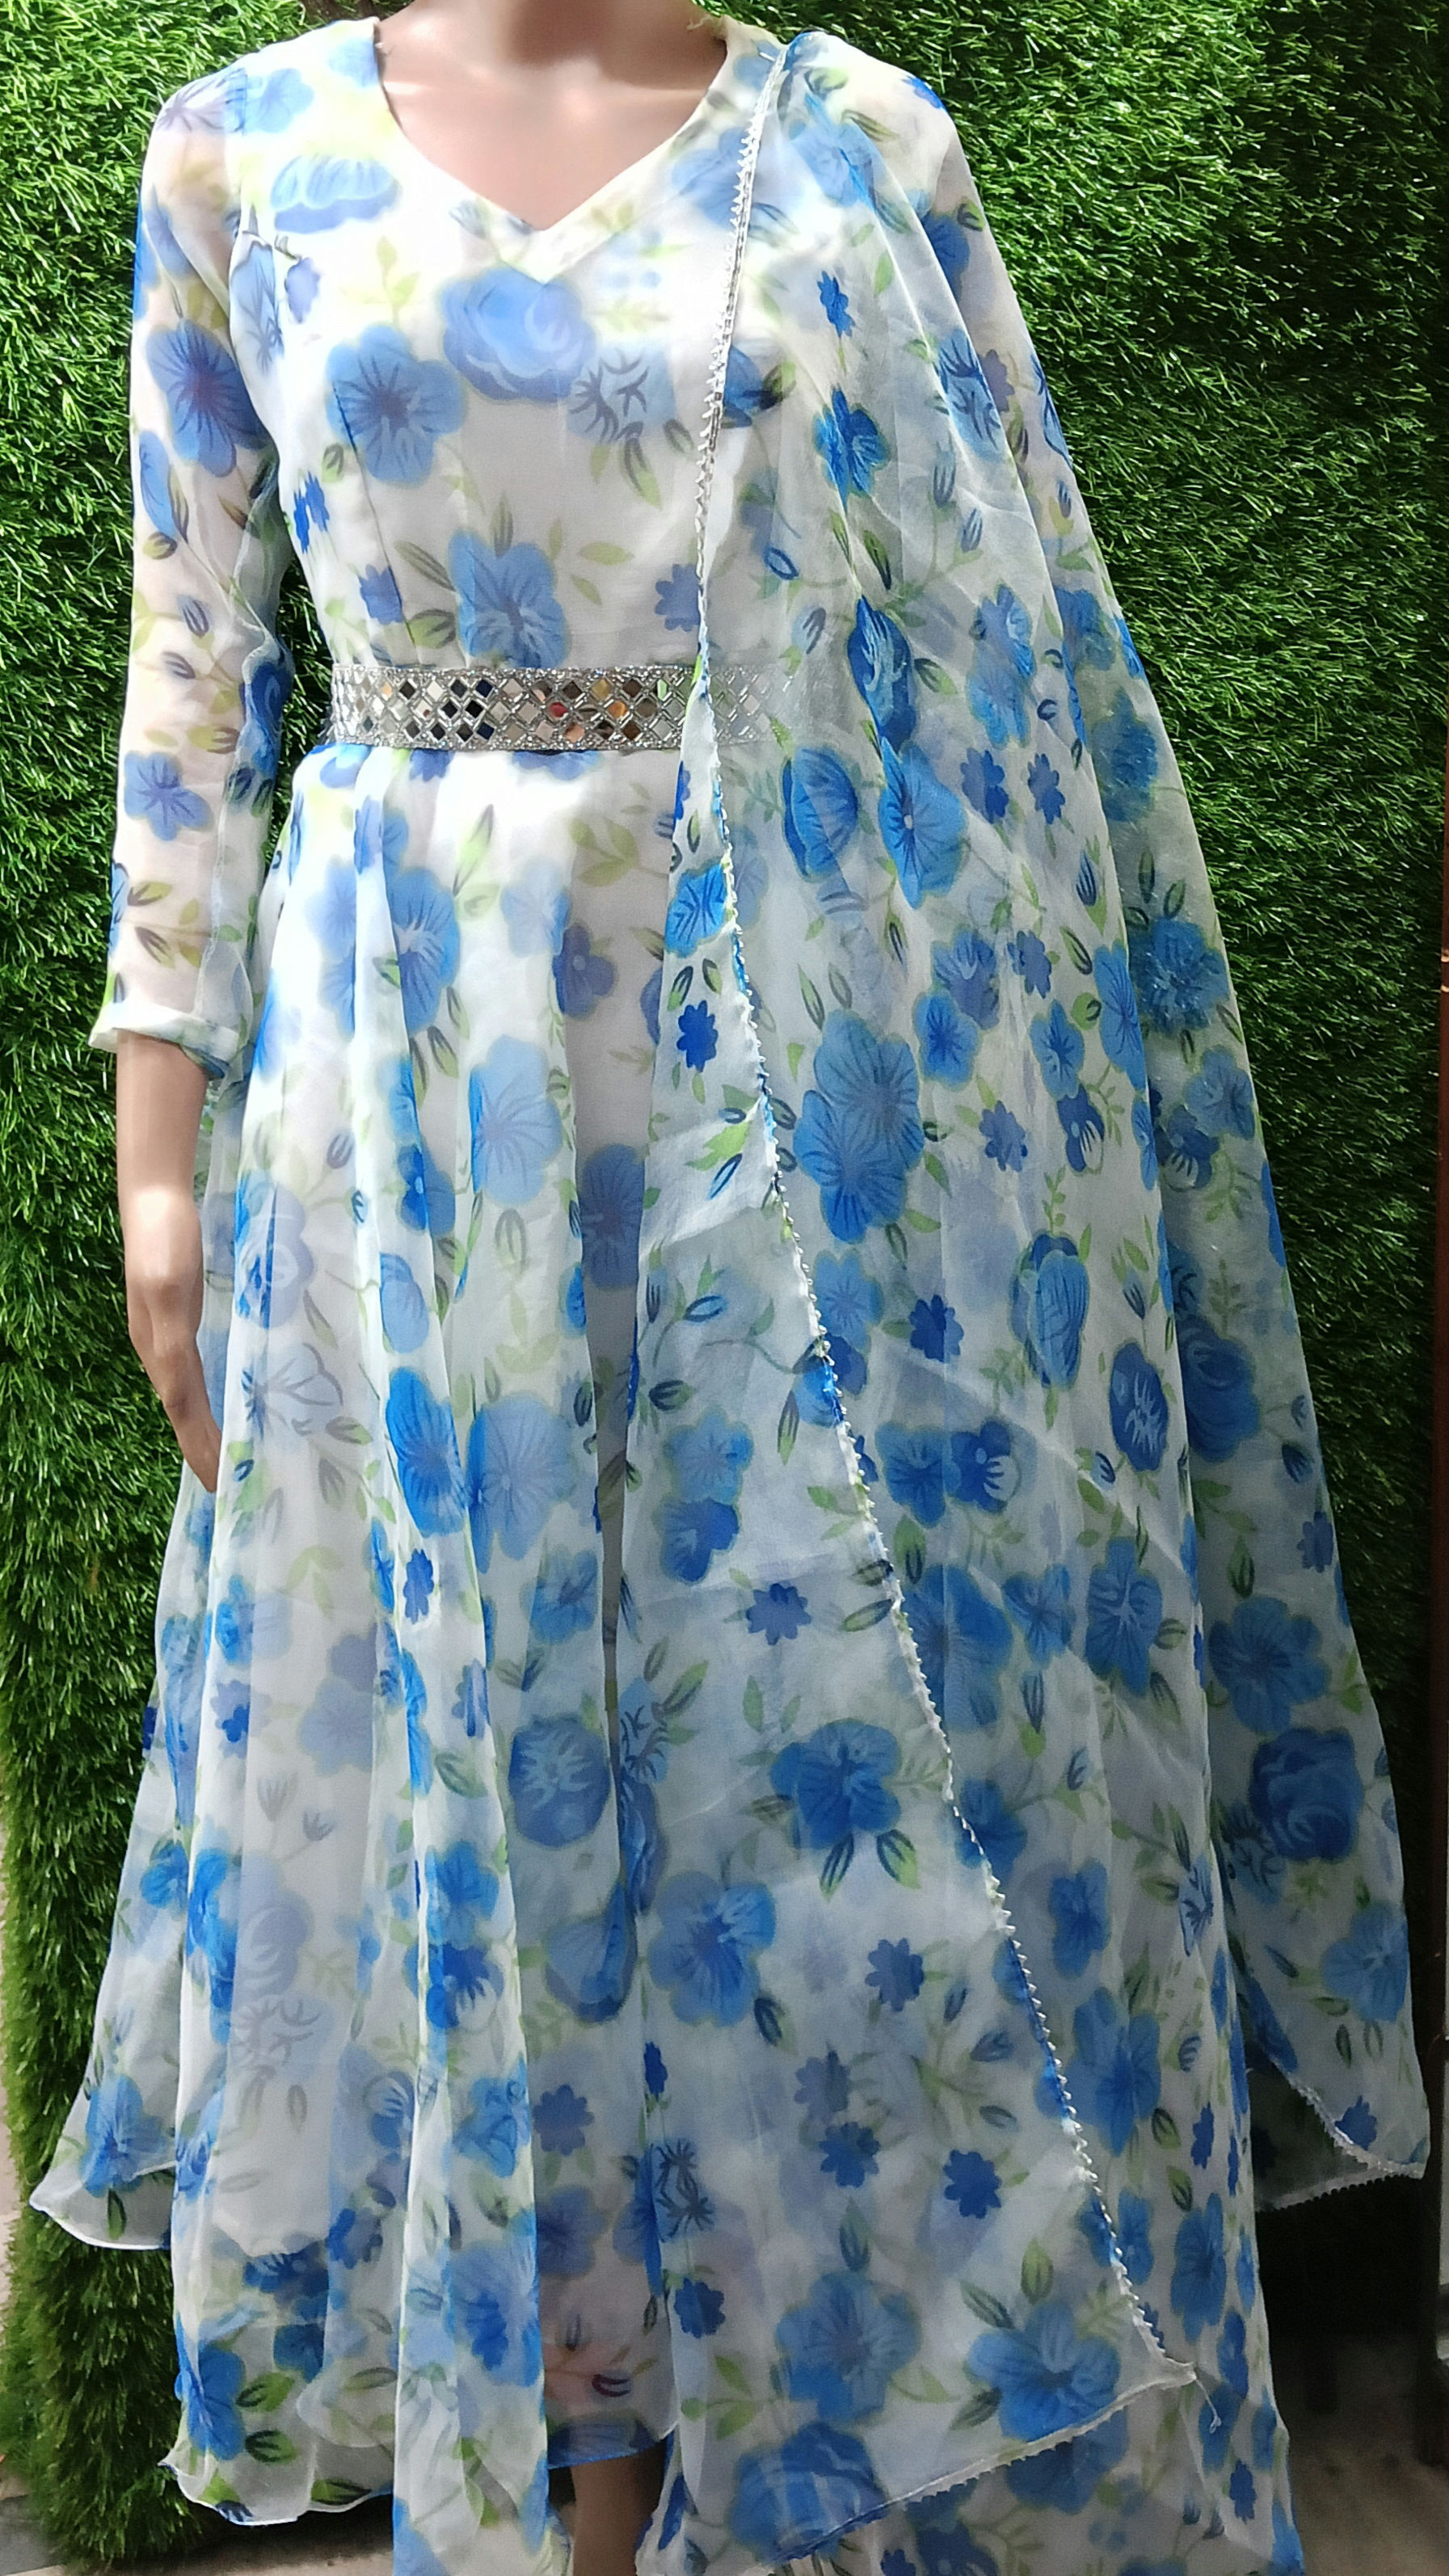 we are manufacturing all types of ladies wear dress. you can also costomize design as per your demand. for more details please contact us 